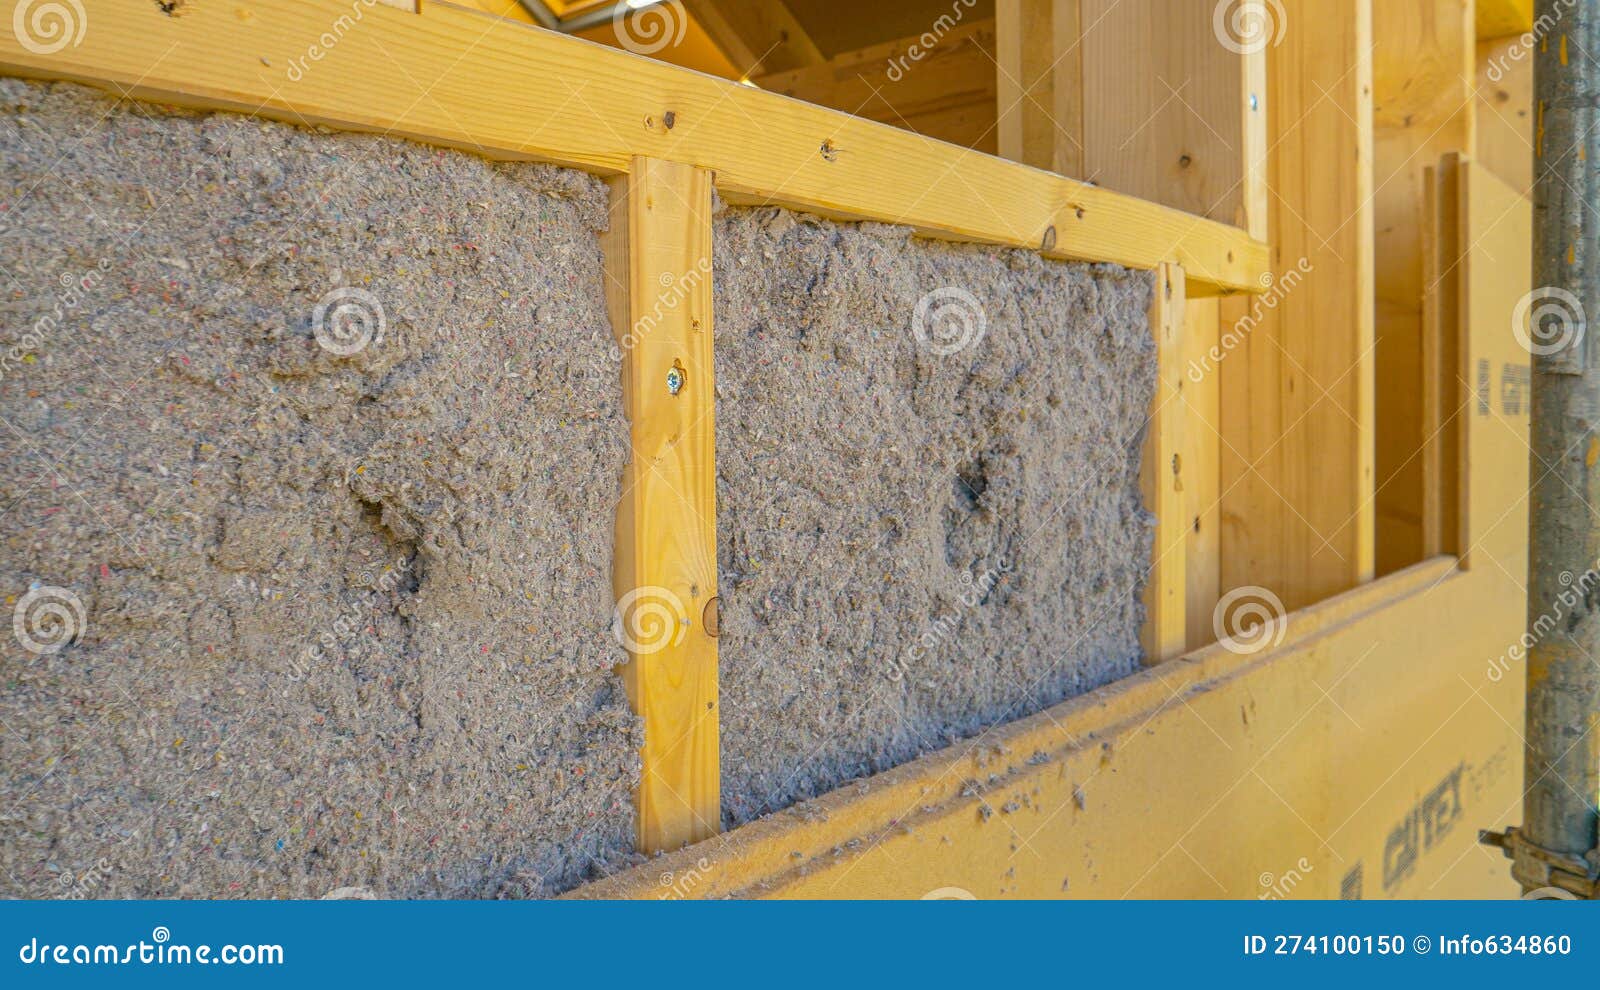 close up: ecofriendly cellulose insulation fills up a frame on a wooden wall.